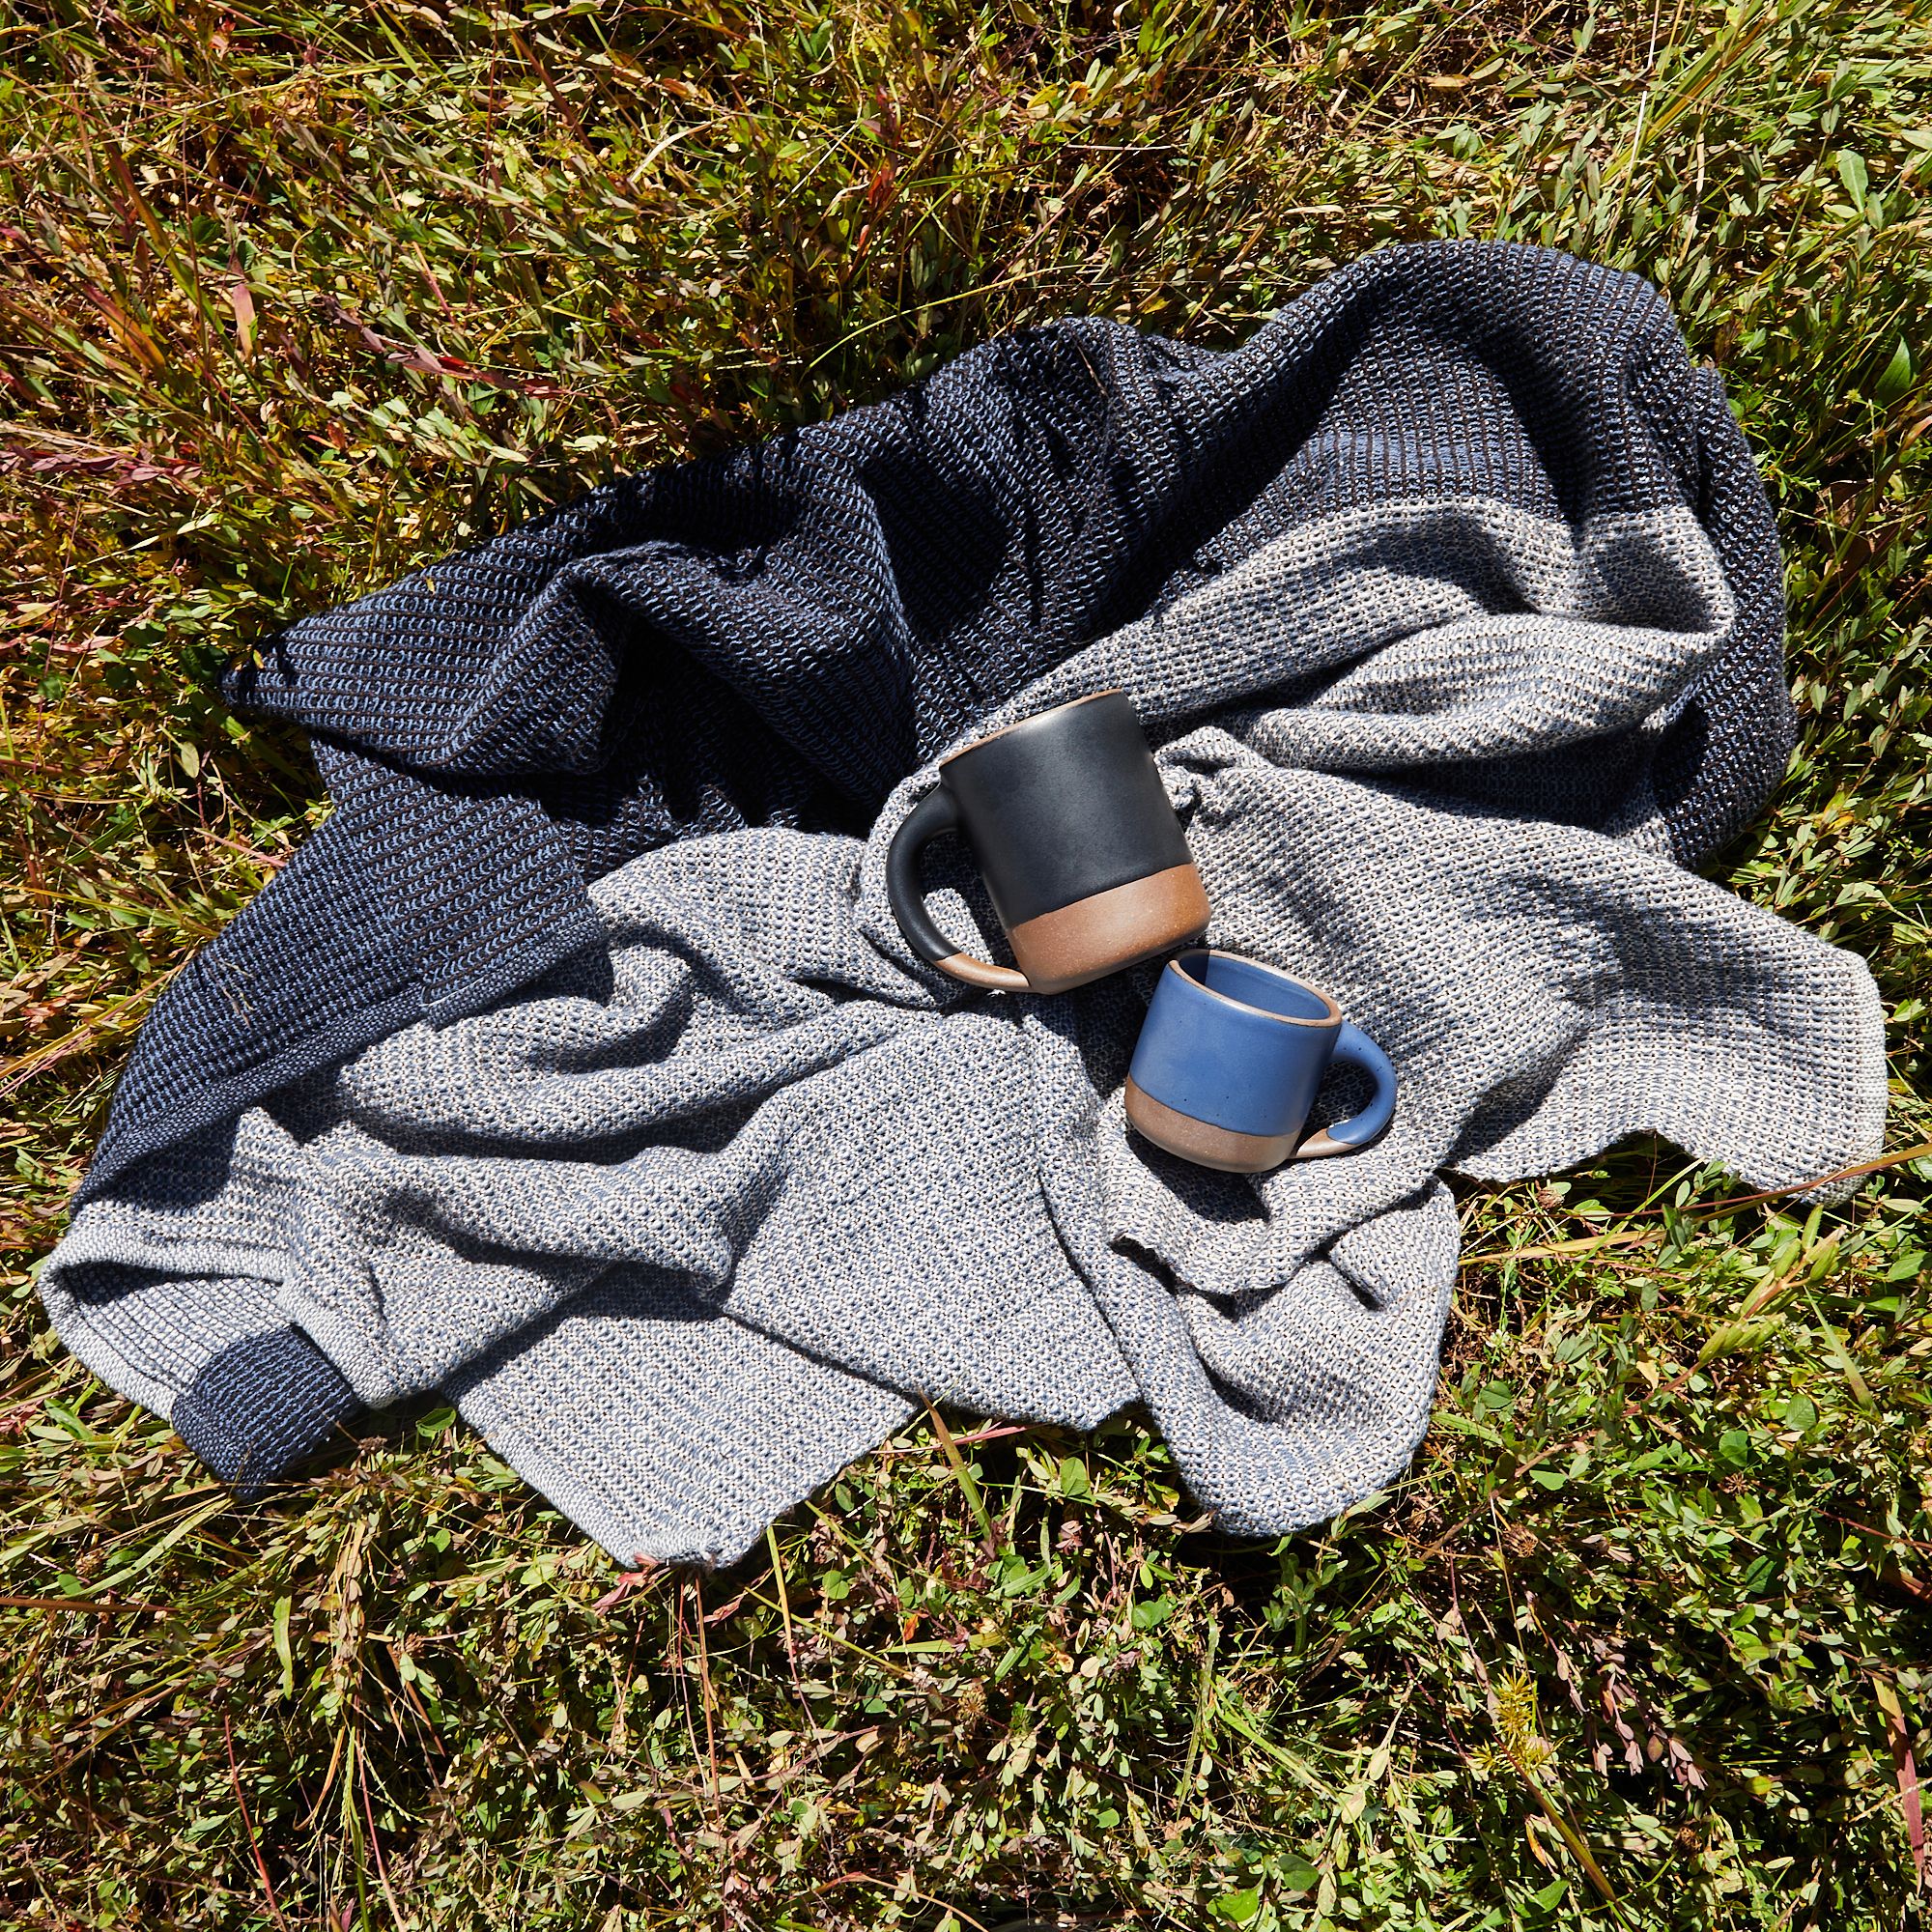 Two mugs, one blue, one black, resting on top of a blue, white, and black woven lap blanket nestled in tall grass